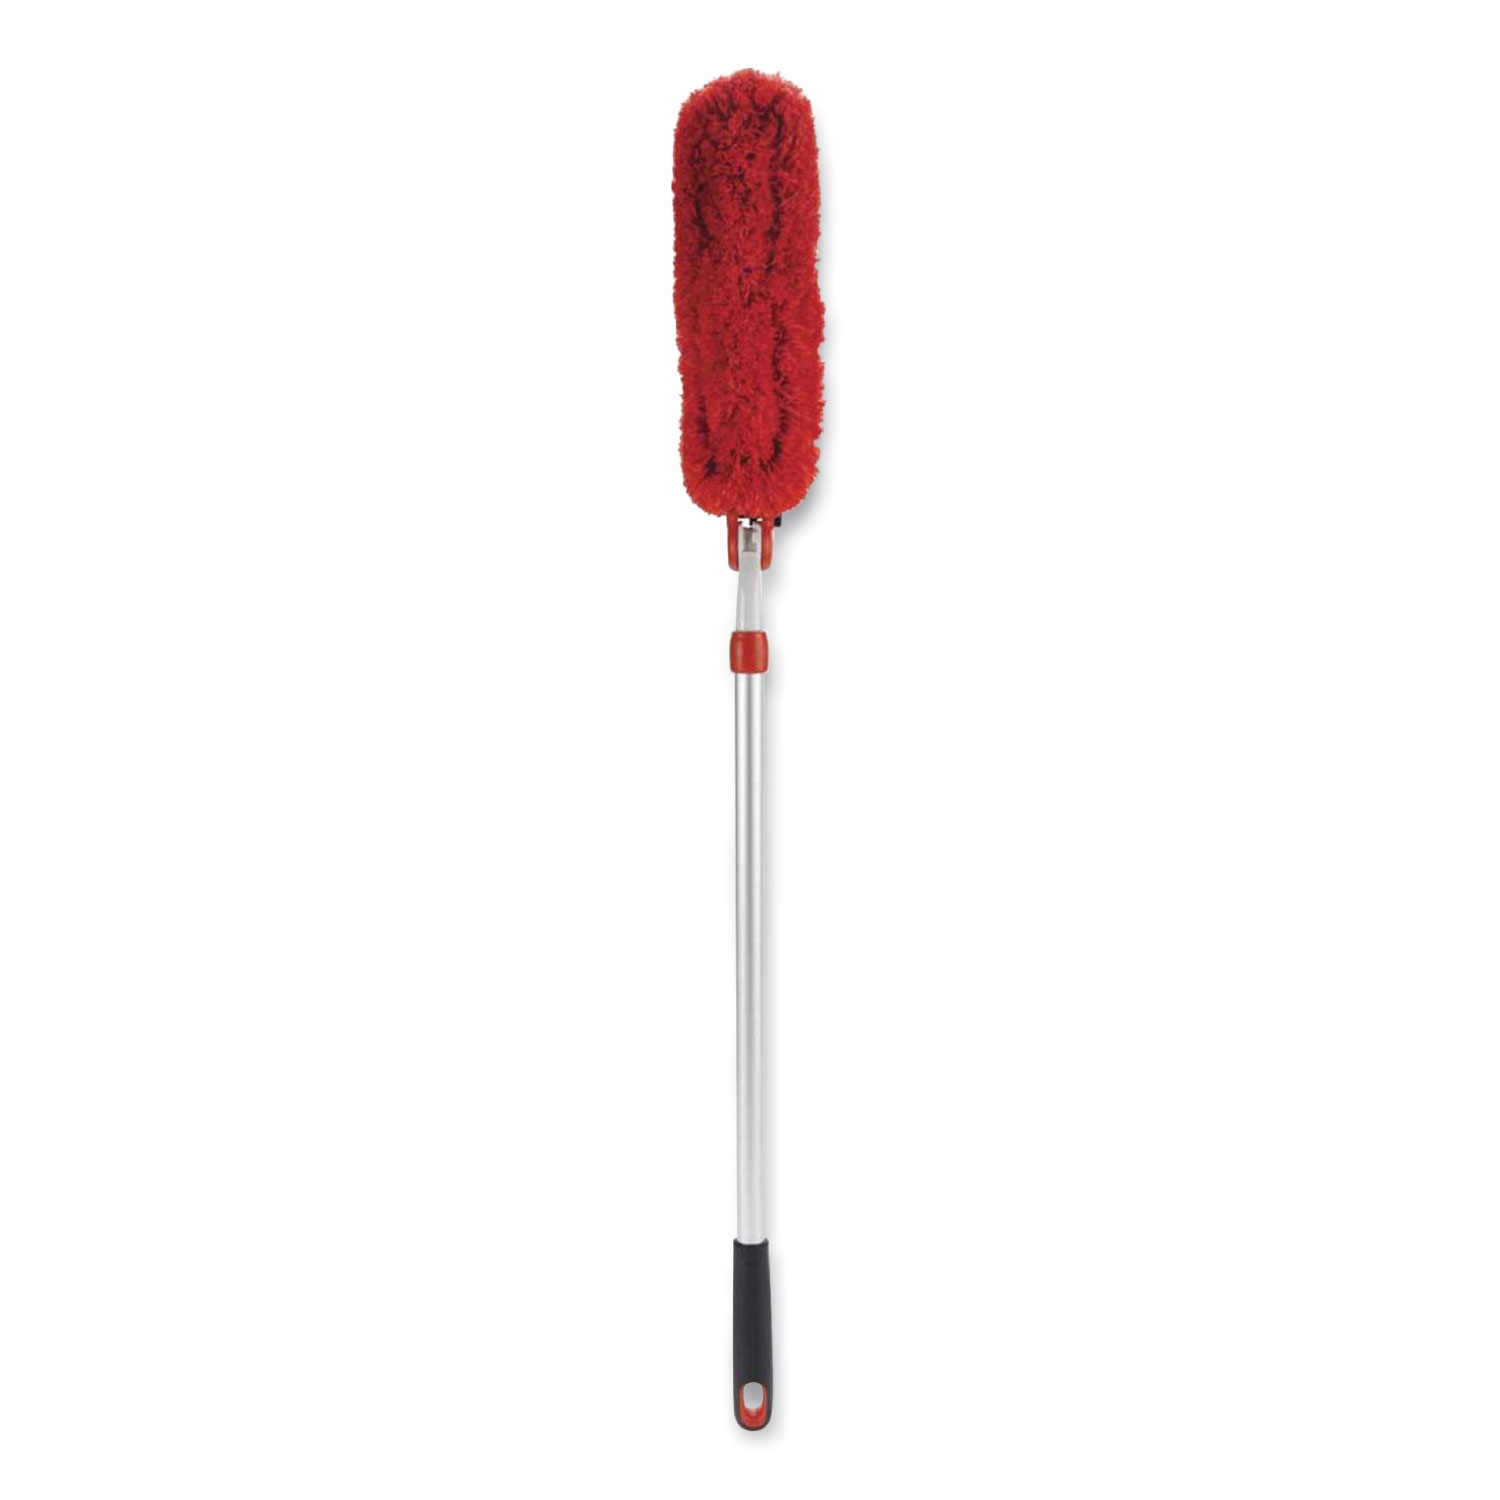 OXO Good Grips Microfiber Extendable Duster, Aluminum Handle Extends to 27 to 54